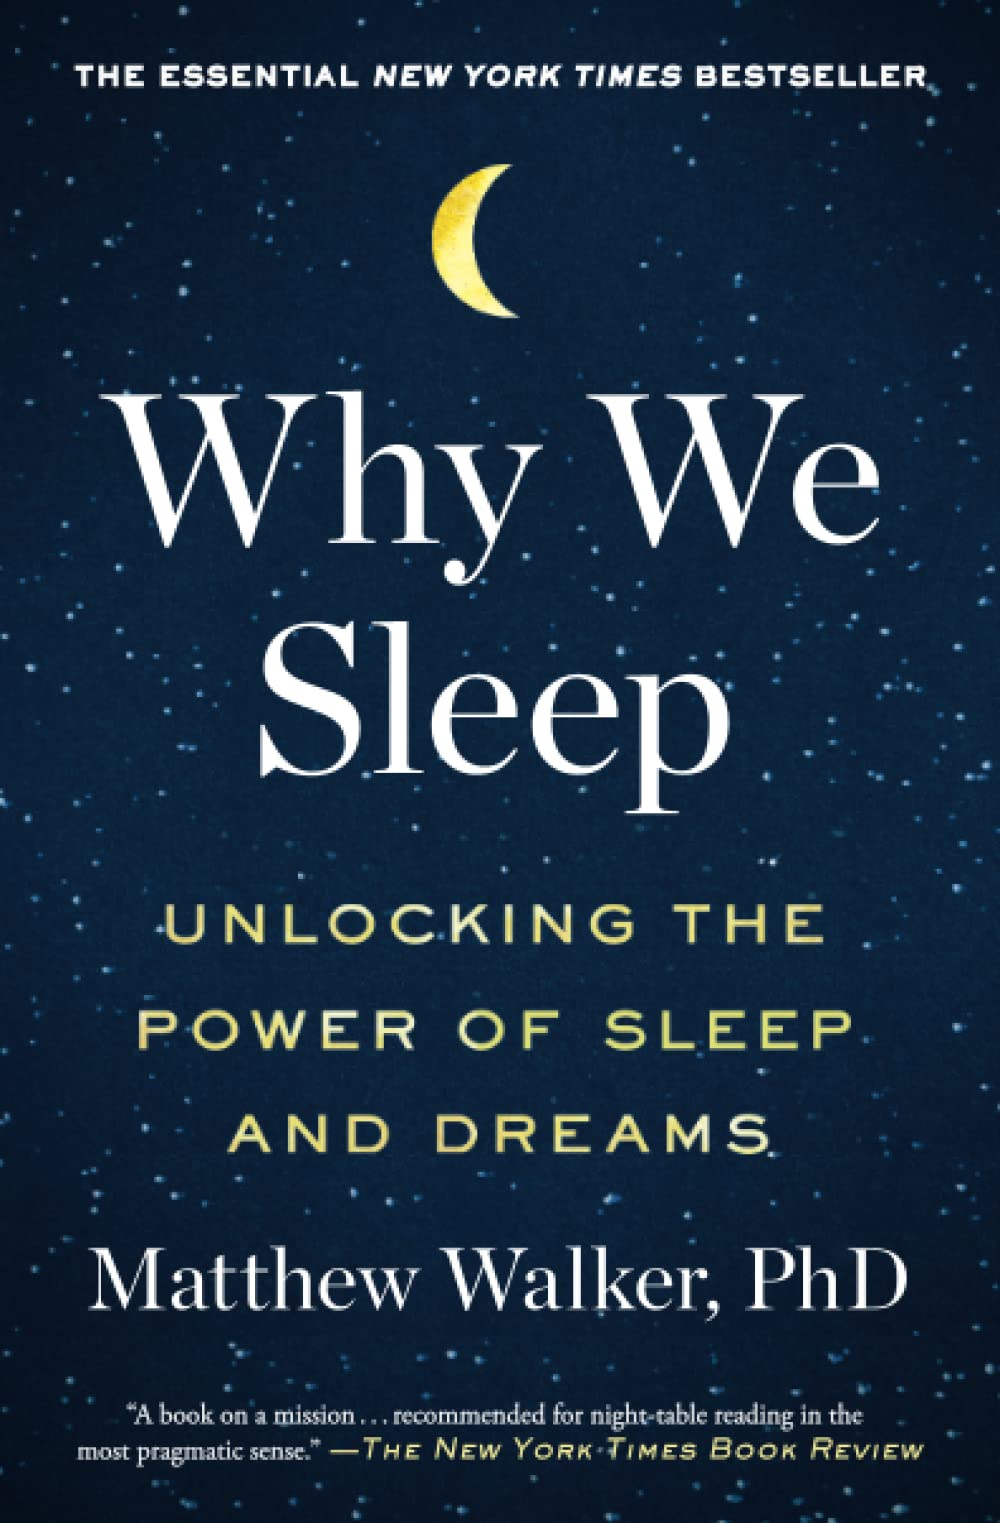 Book Cover titled "Why We Sleep" with a starry night background.